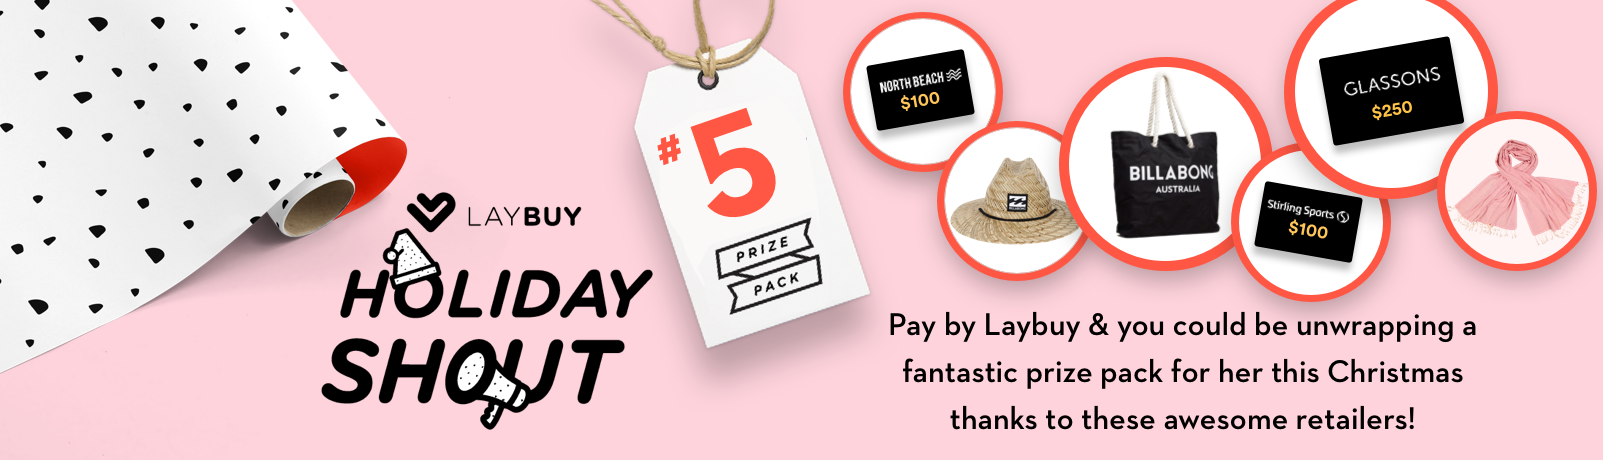 Laybuy_Holiday_Shout_Week_5_Terms_Conditions